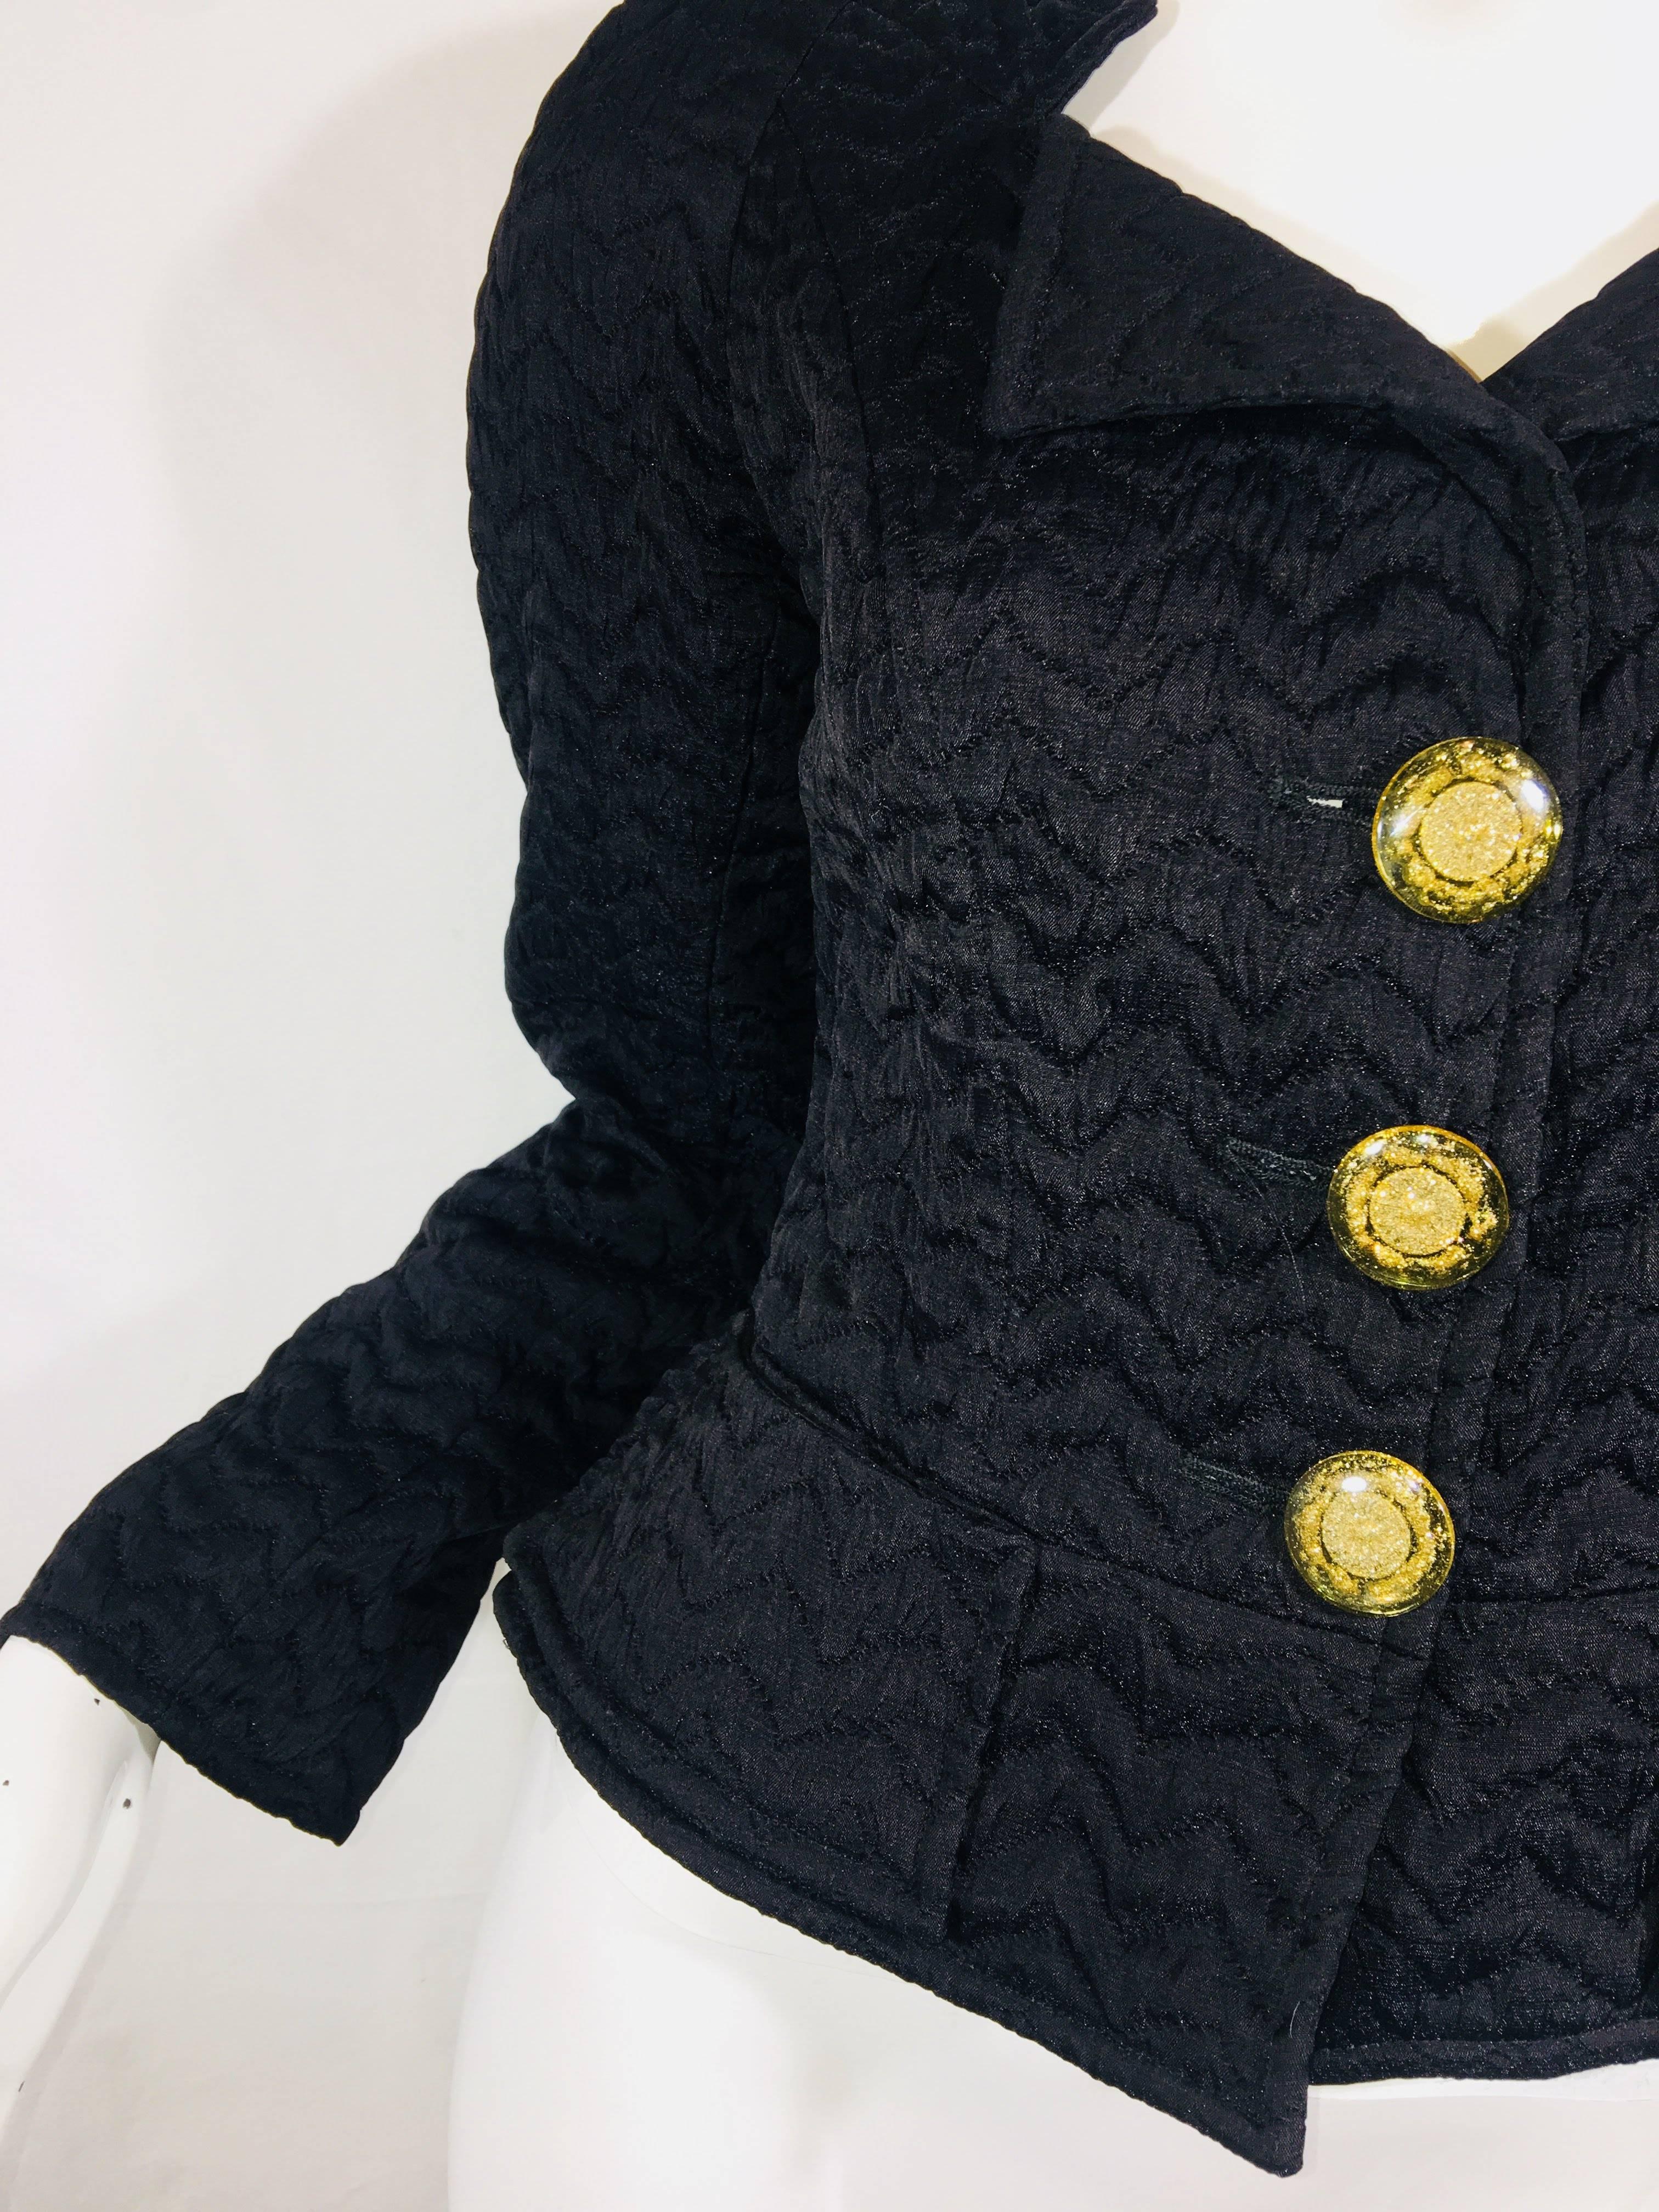 Christian Lacroix Black Nylon Cropped Jacket with Gold Glitter Buttons.